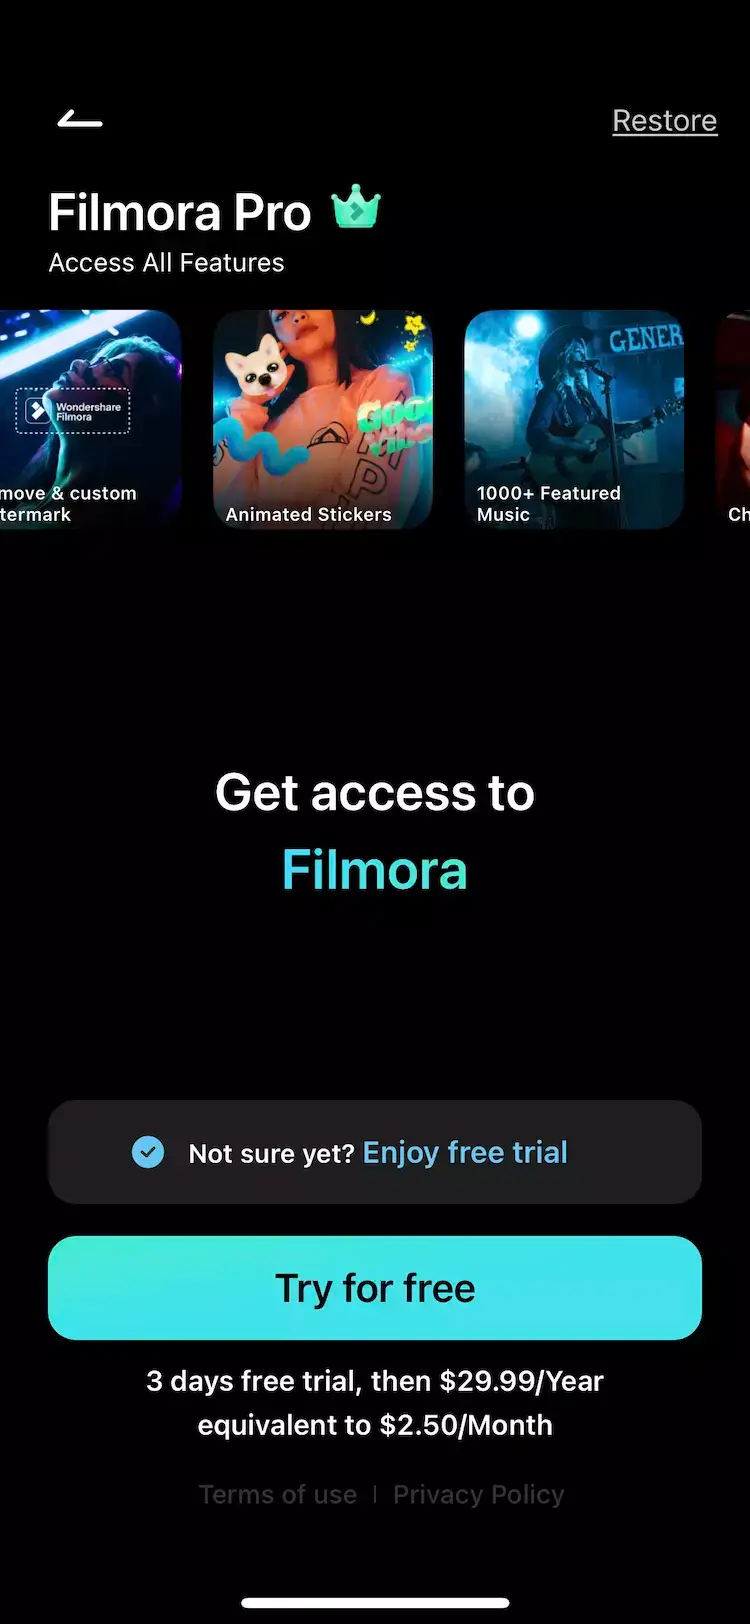 A mobile paywall design example by Filmora - Video Editor, Maker from the Photo and Video category — a trial is on